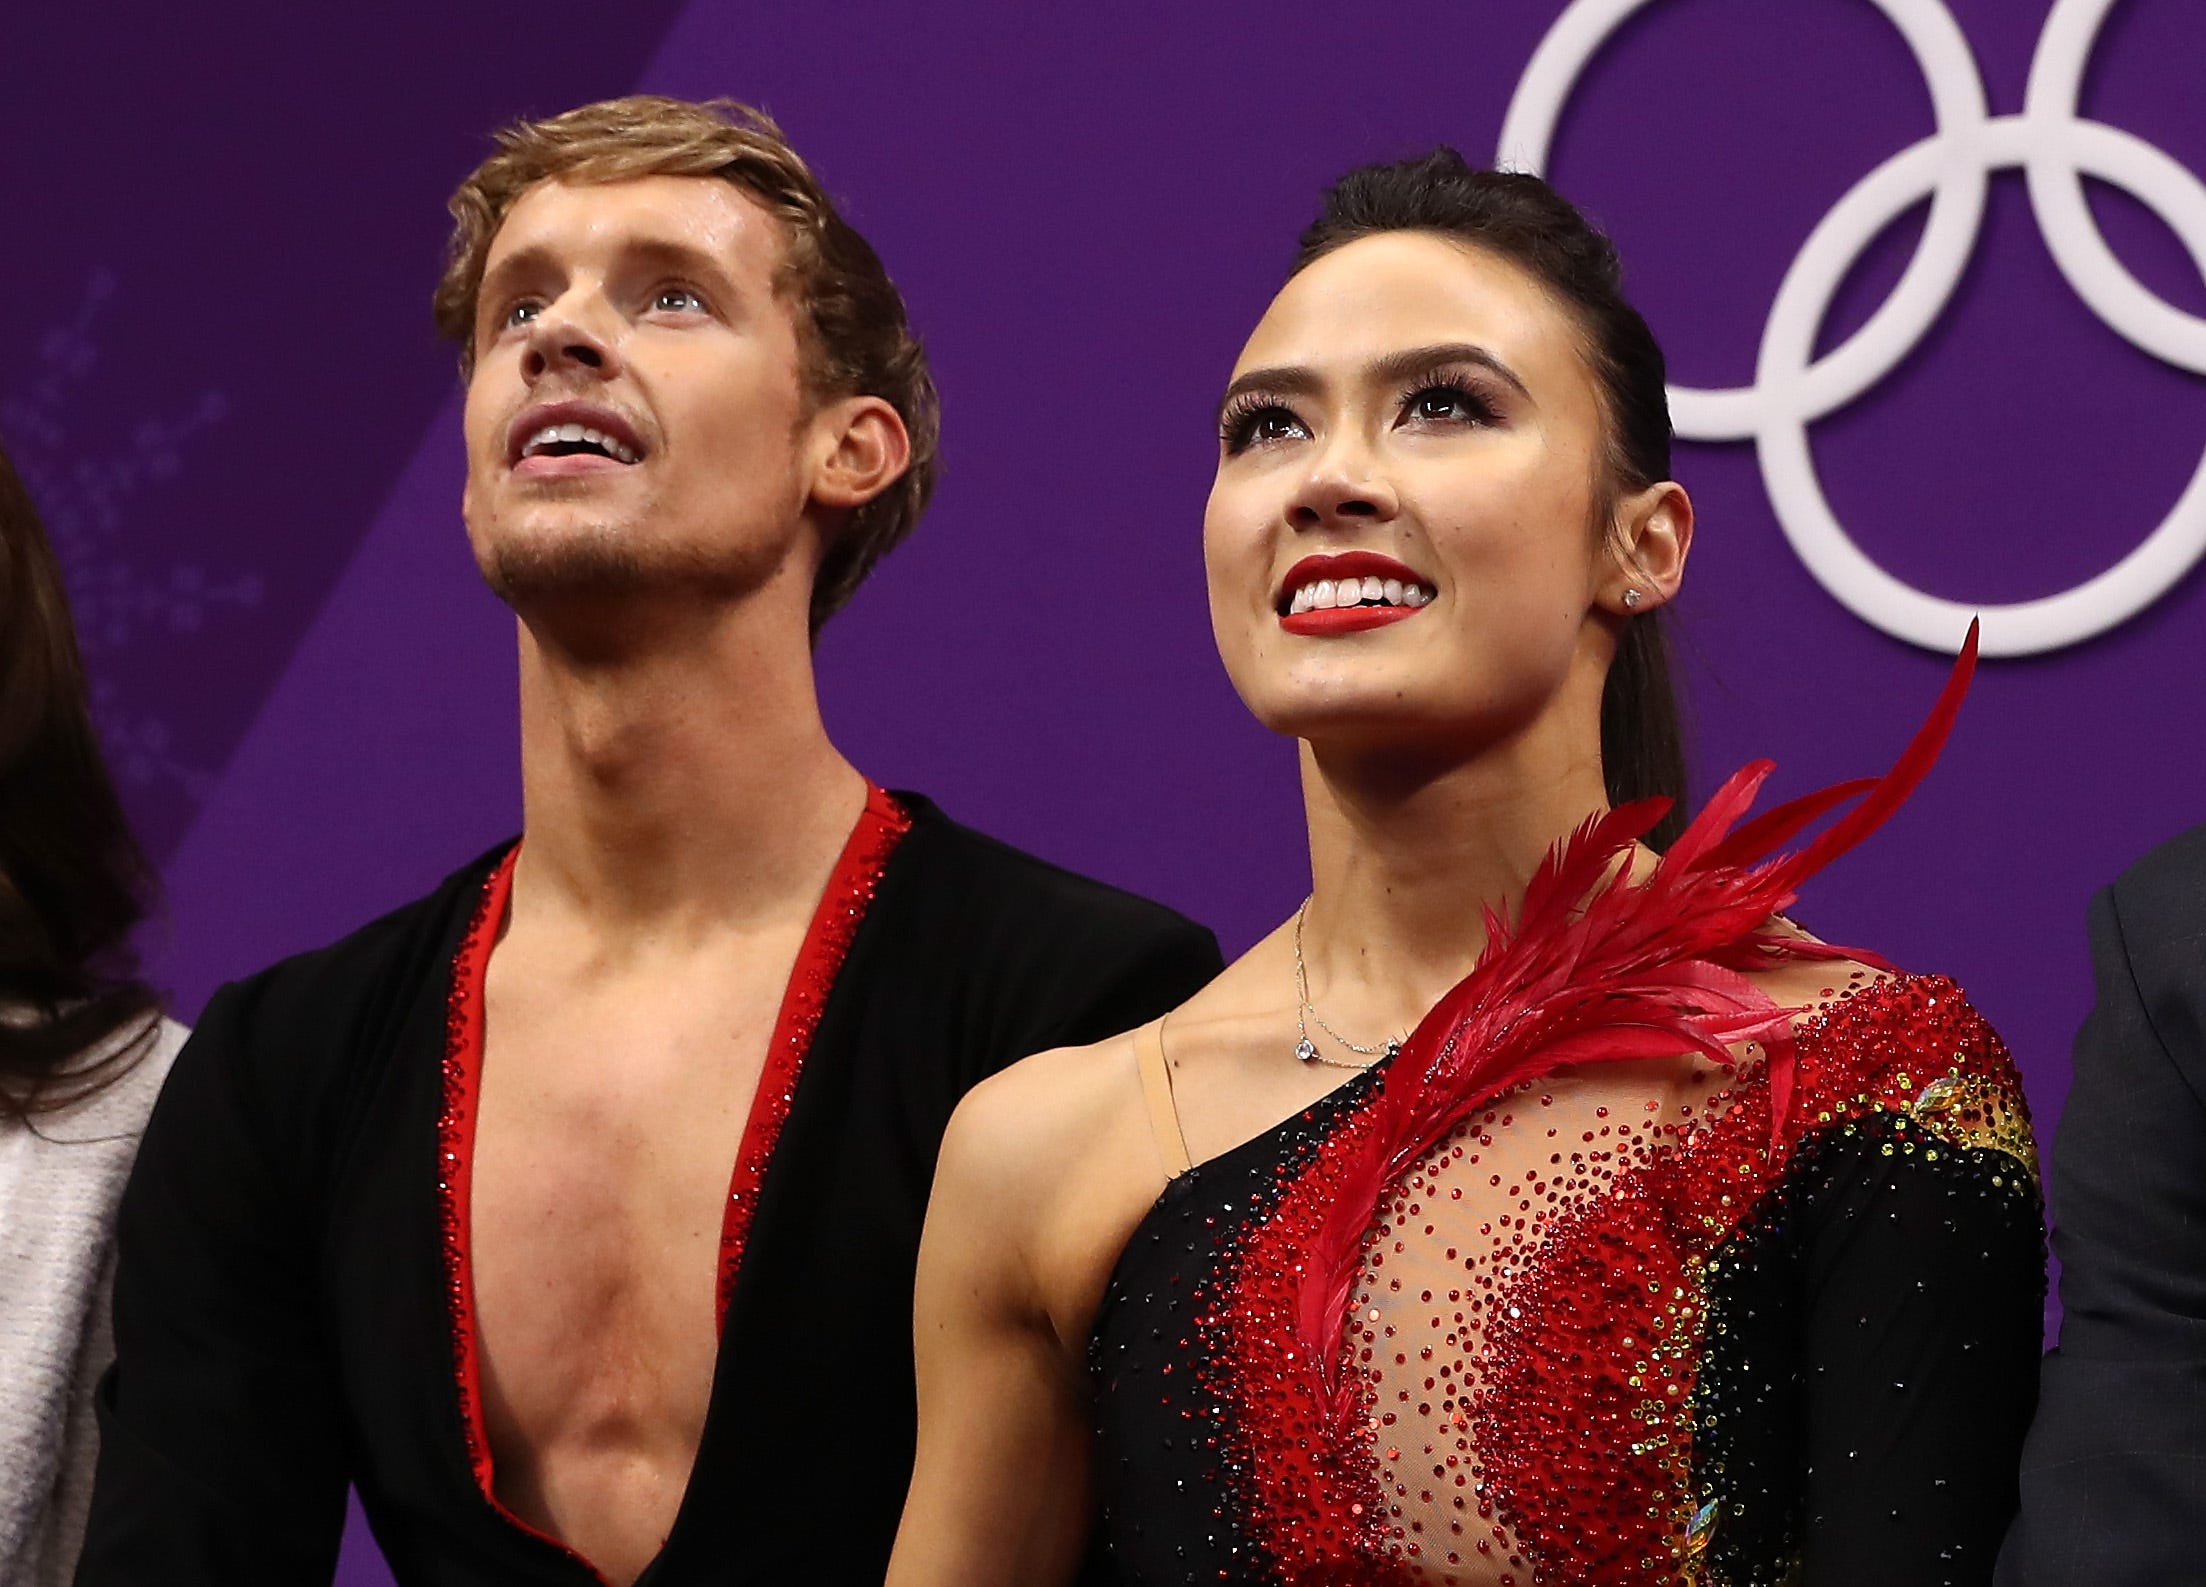 Novi's Madison Chock, right, and Northville's Evan Bates wait for their marks after the ice dance short program at the PyeongChang 2018 Winter Olympic Games.